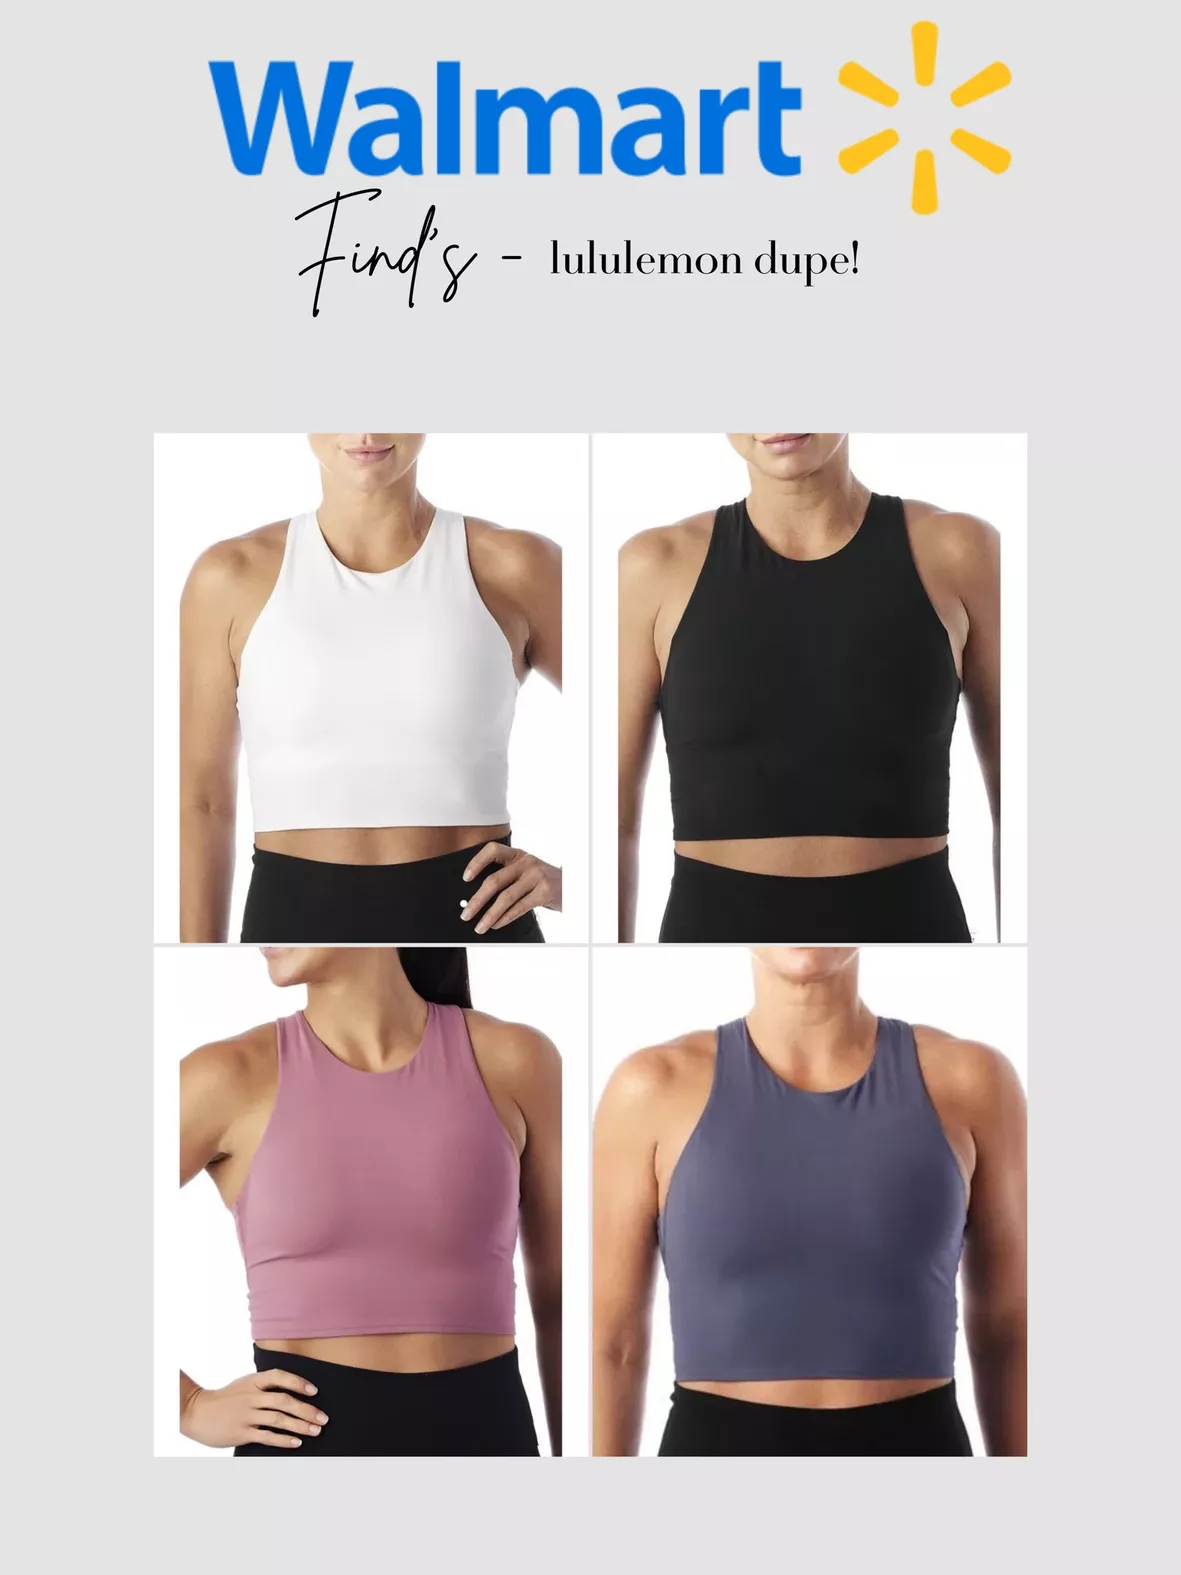 I found Lululemon dupes at Walmart - they're identical and cost as